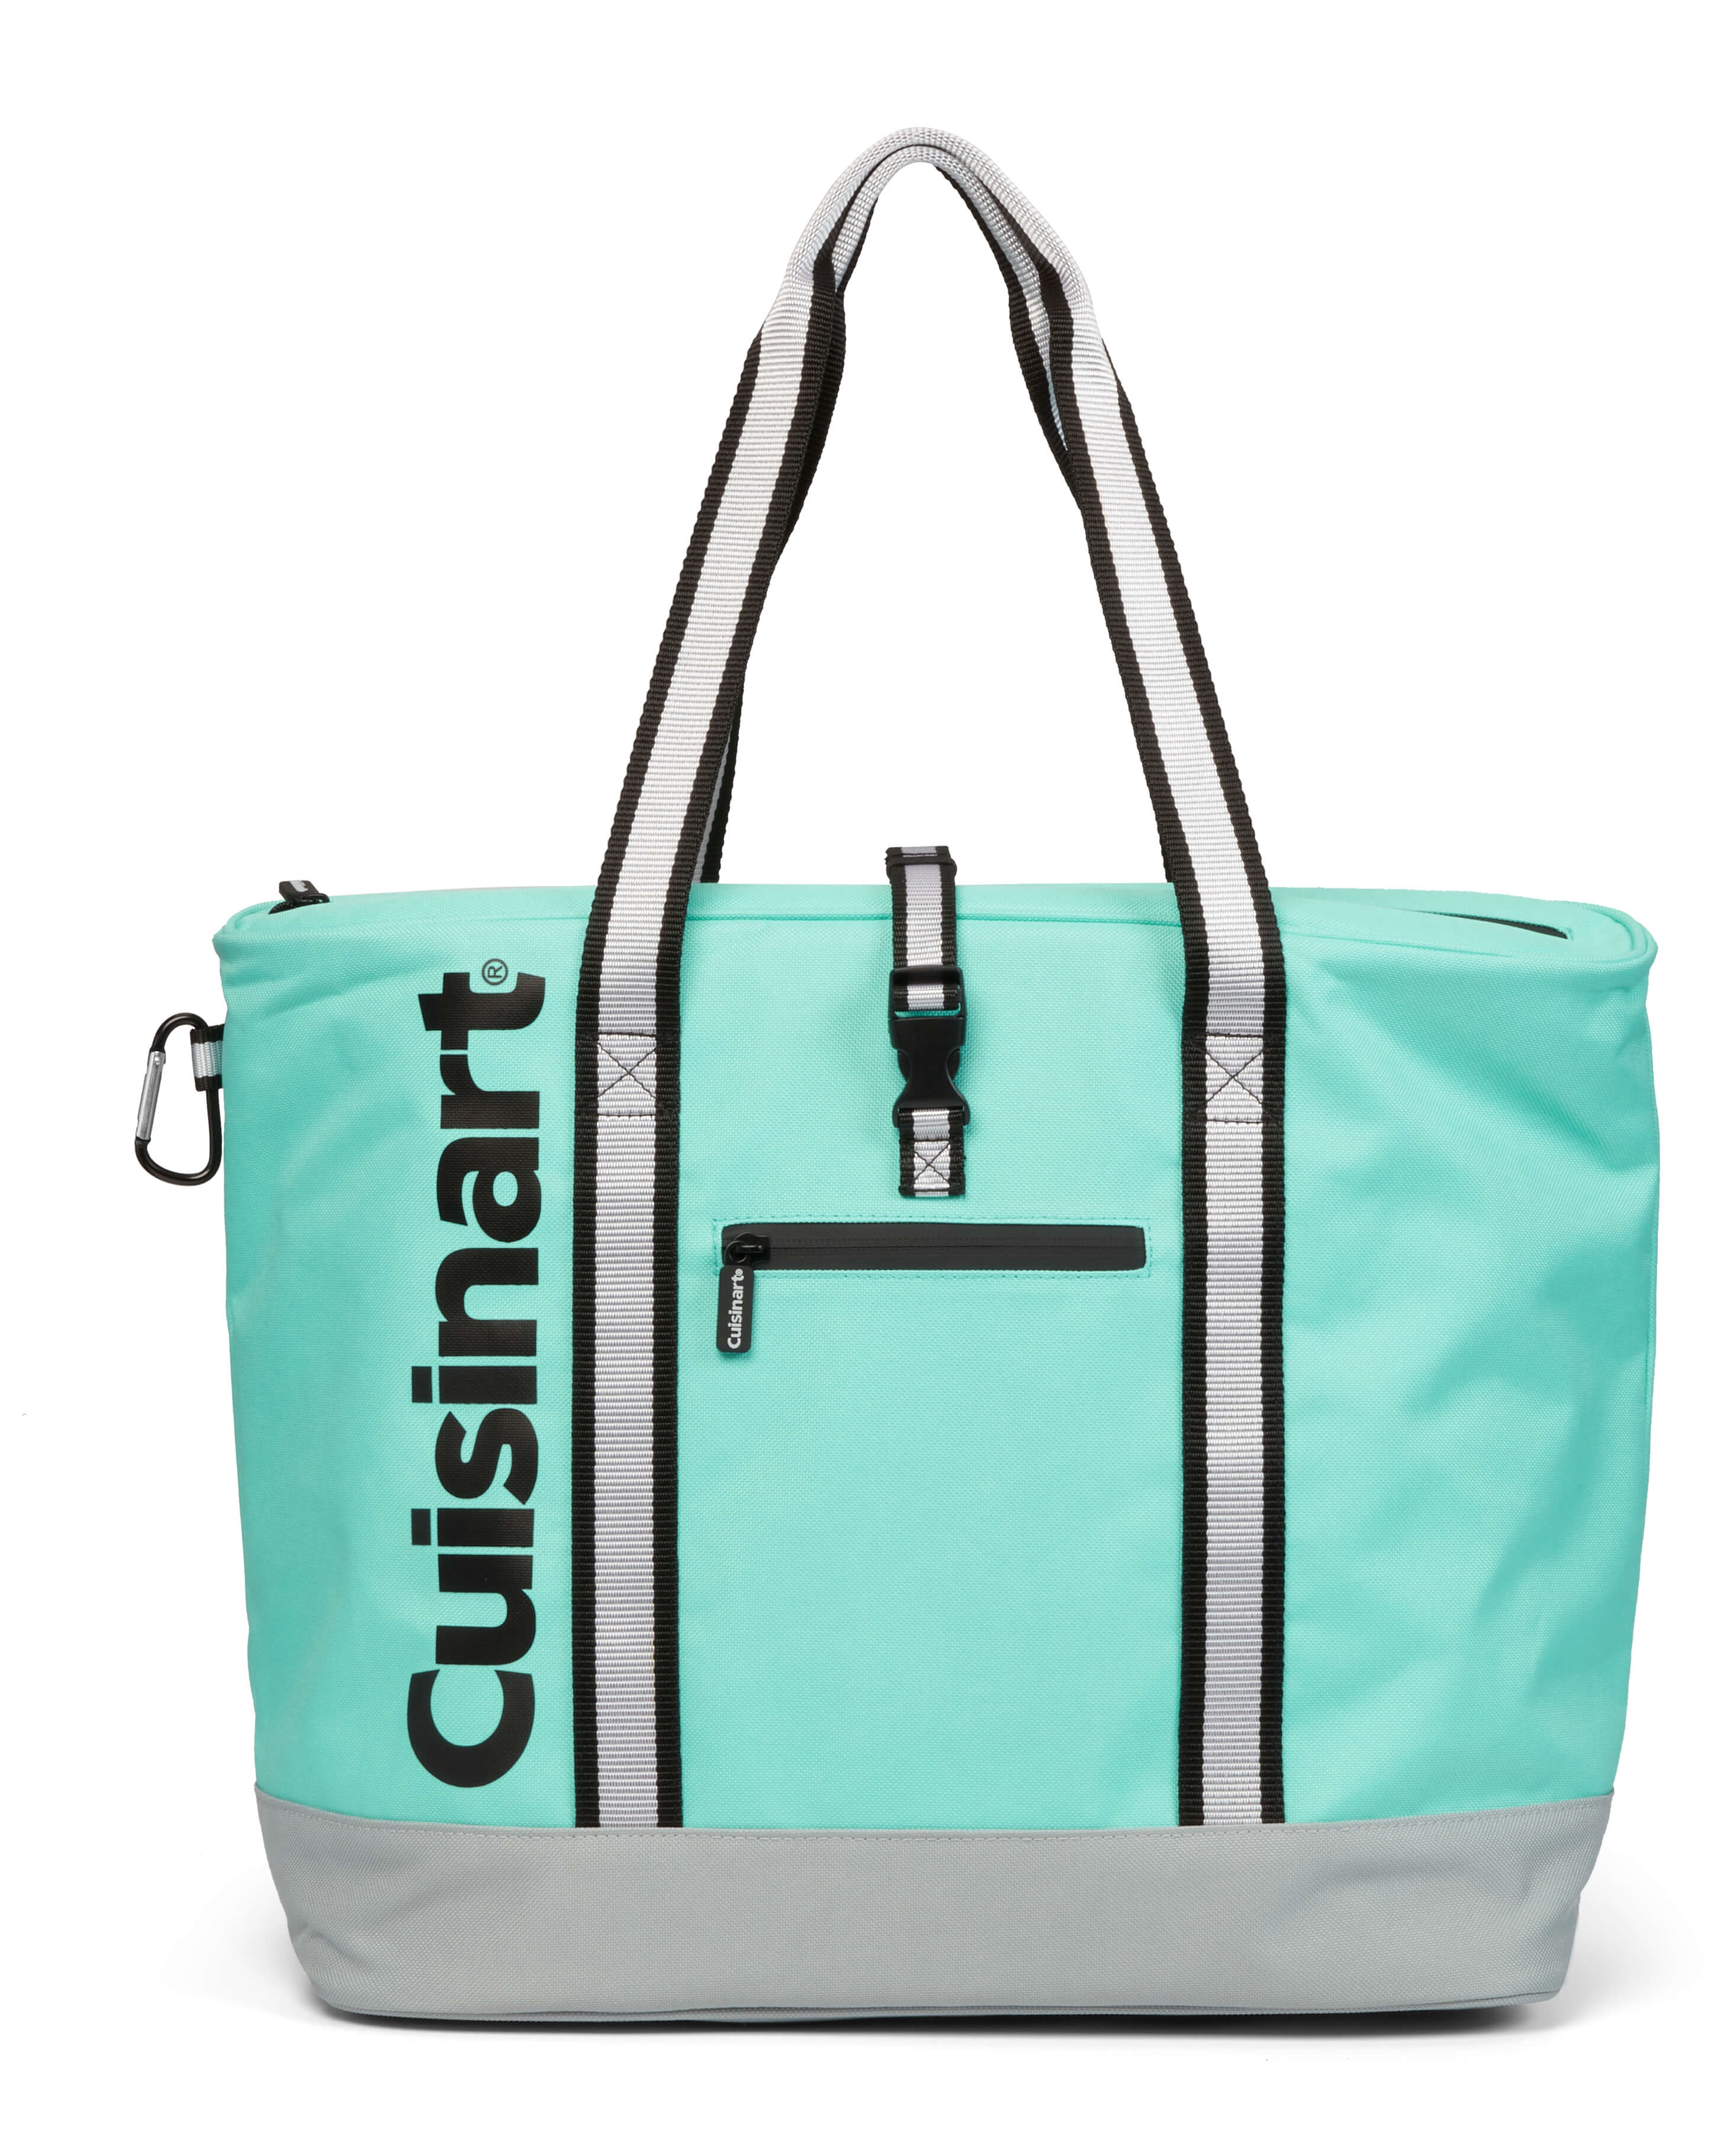 Discontinued Tote Cooler